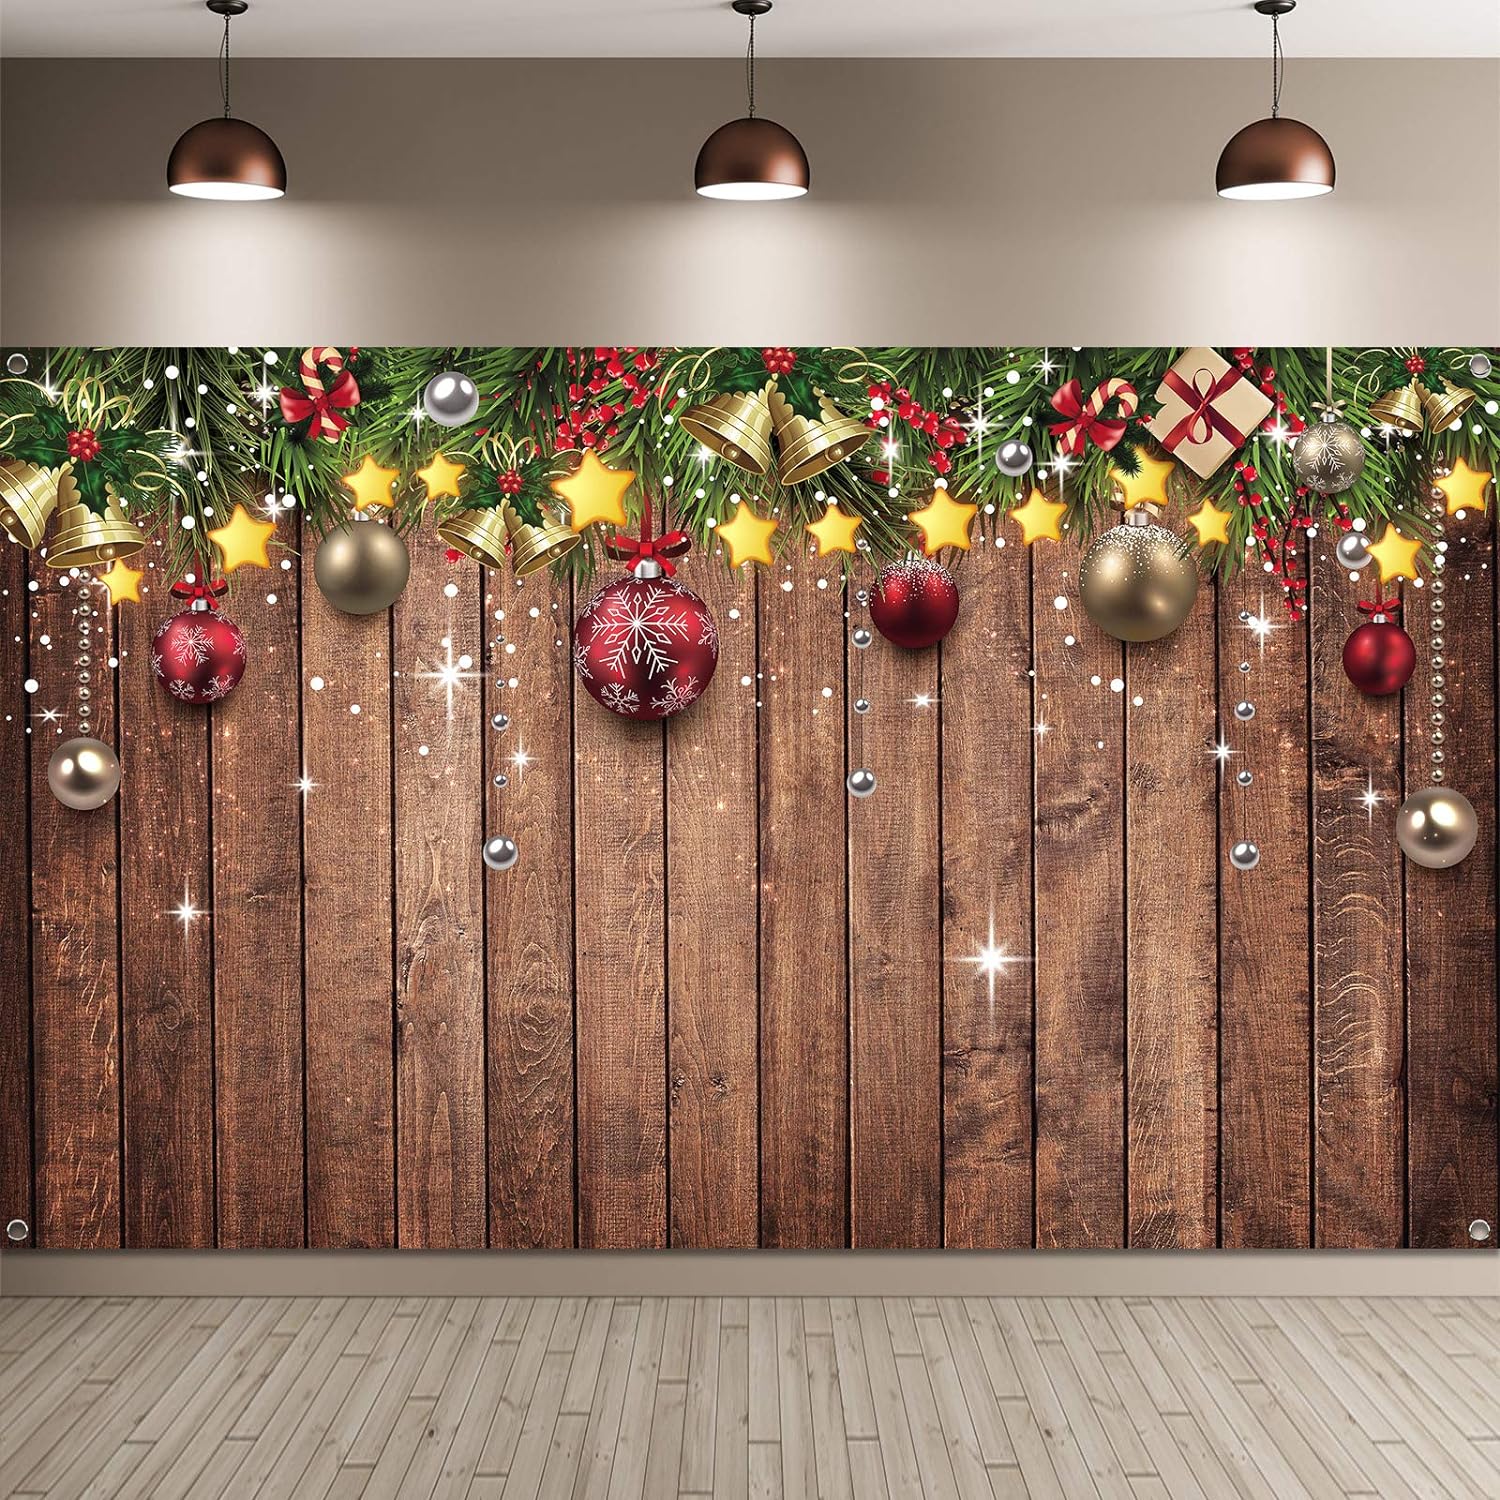 Fabric Christmas Backdrops: The Top 10 Creative Ways to Use Them for Holiday Photos